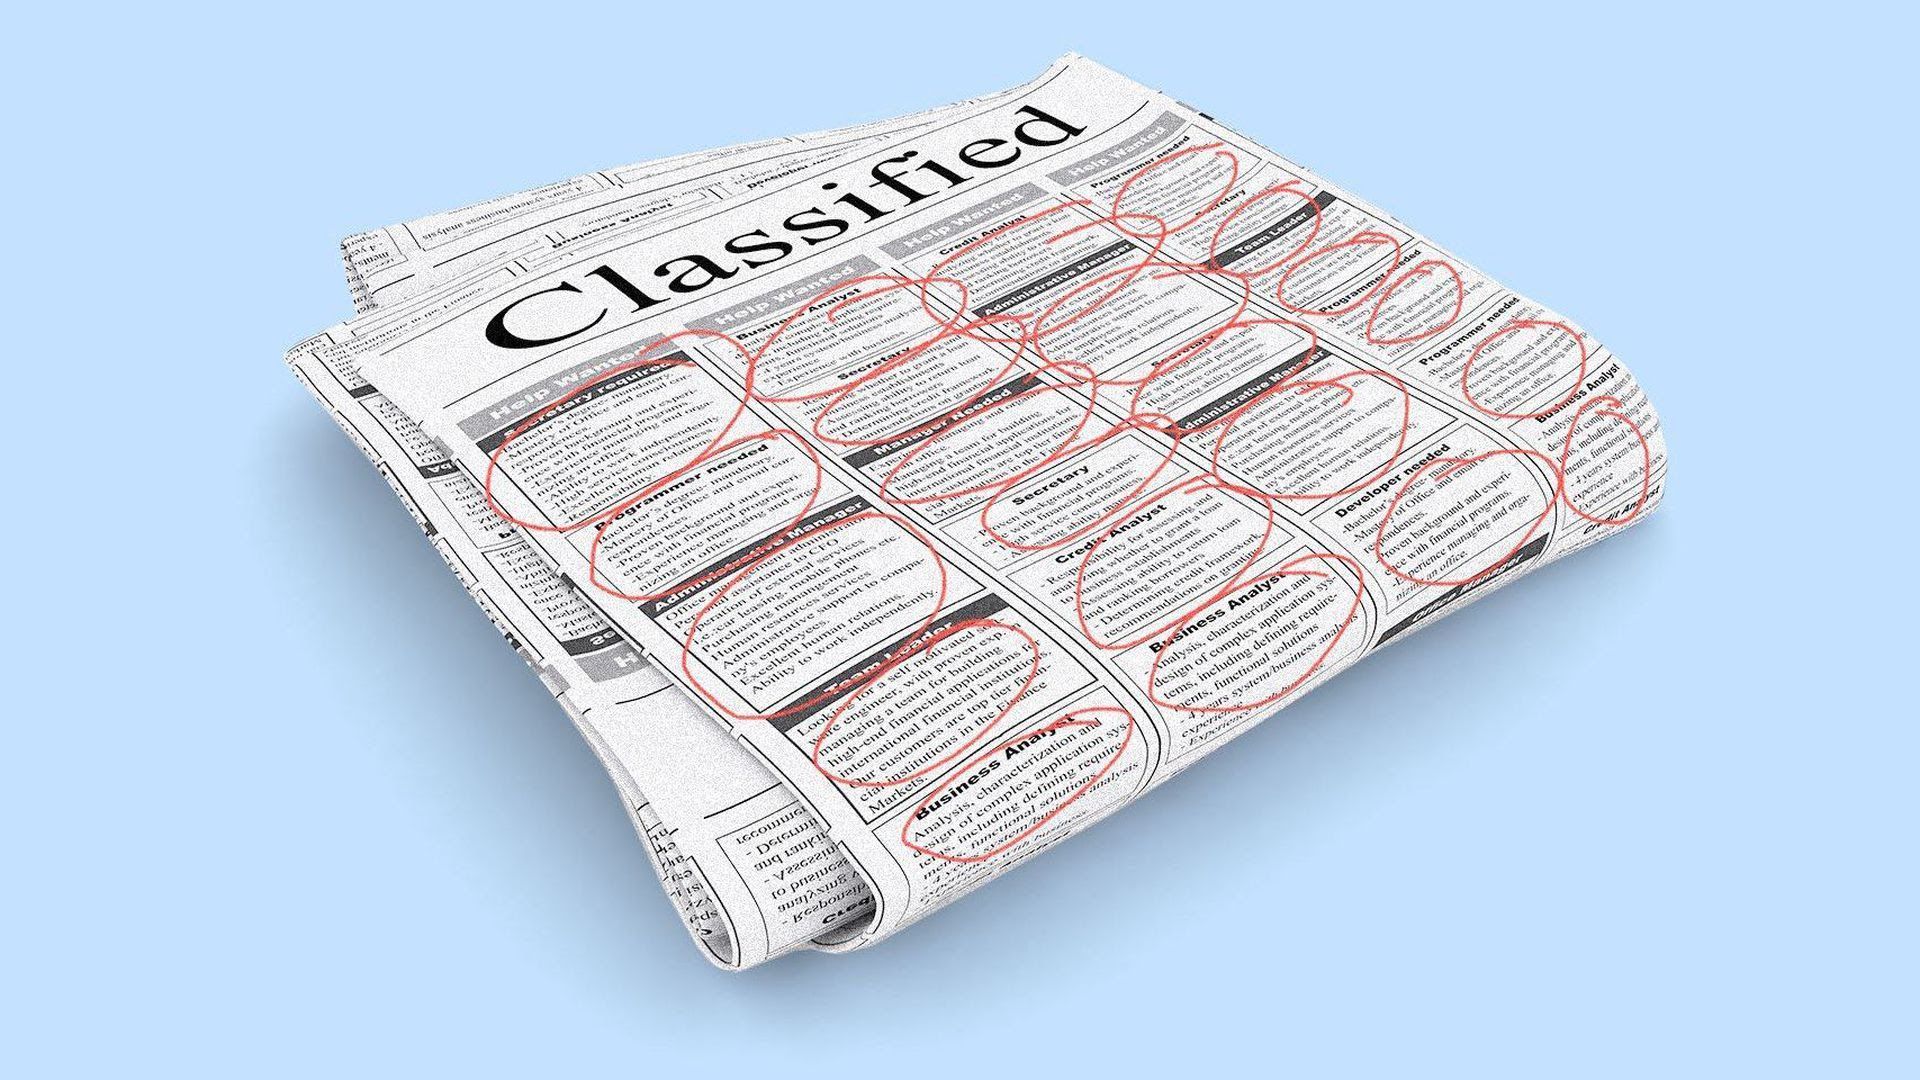 Illustration of the classified section of the newspaper with every posting circled in red